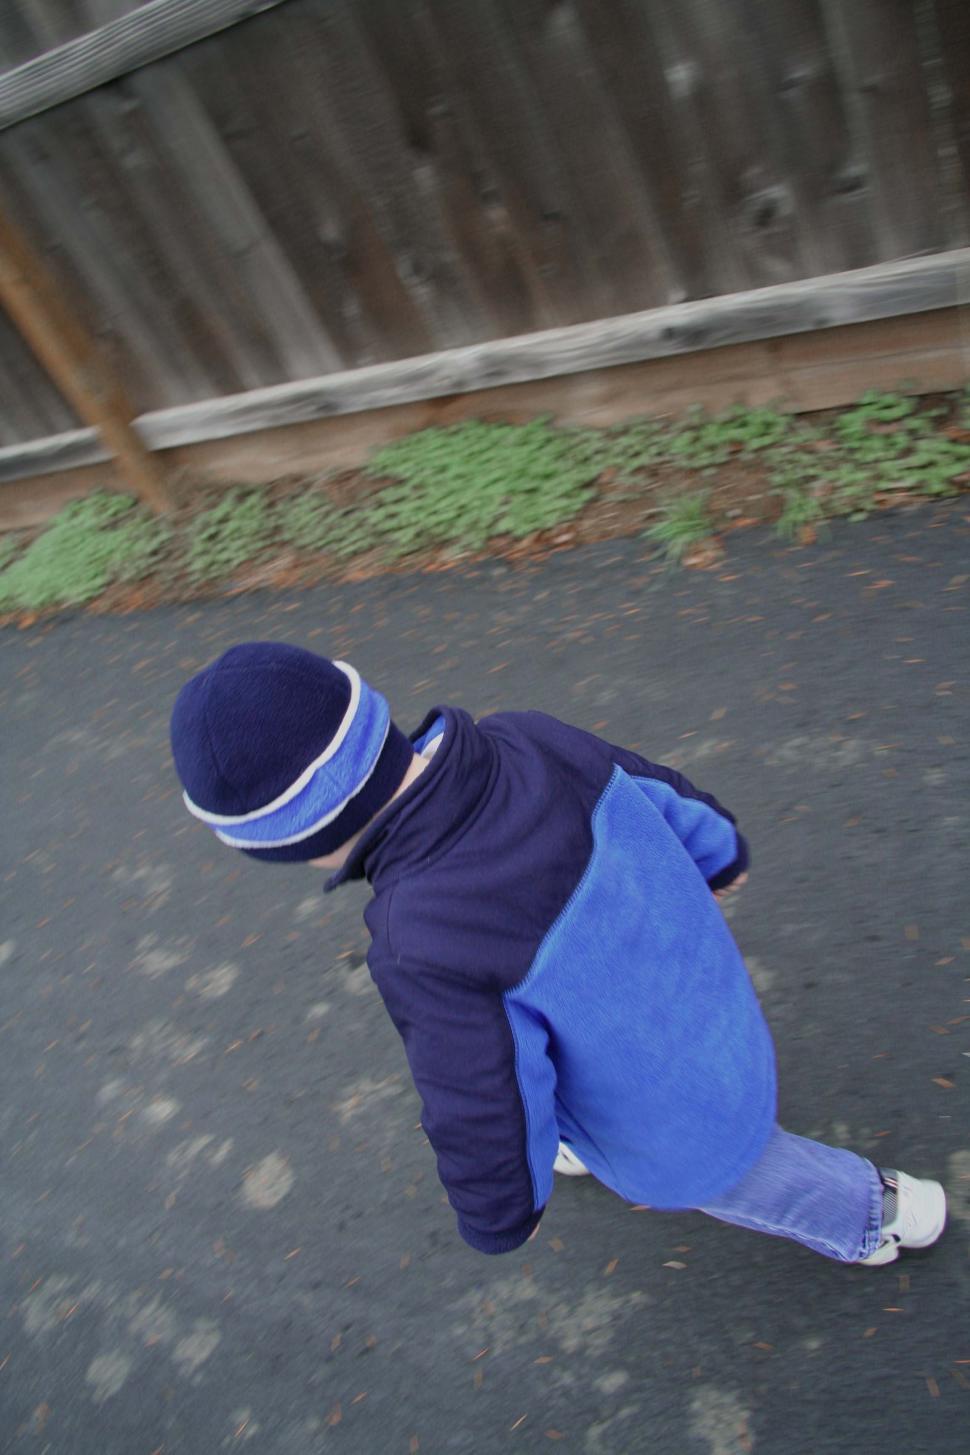 Free Image of Small Child in Blue Jacket and White Shoes 